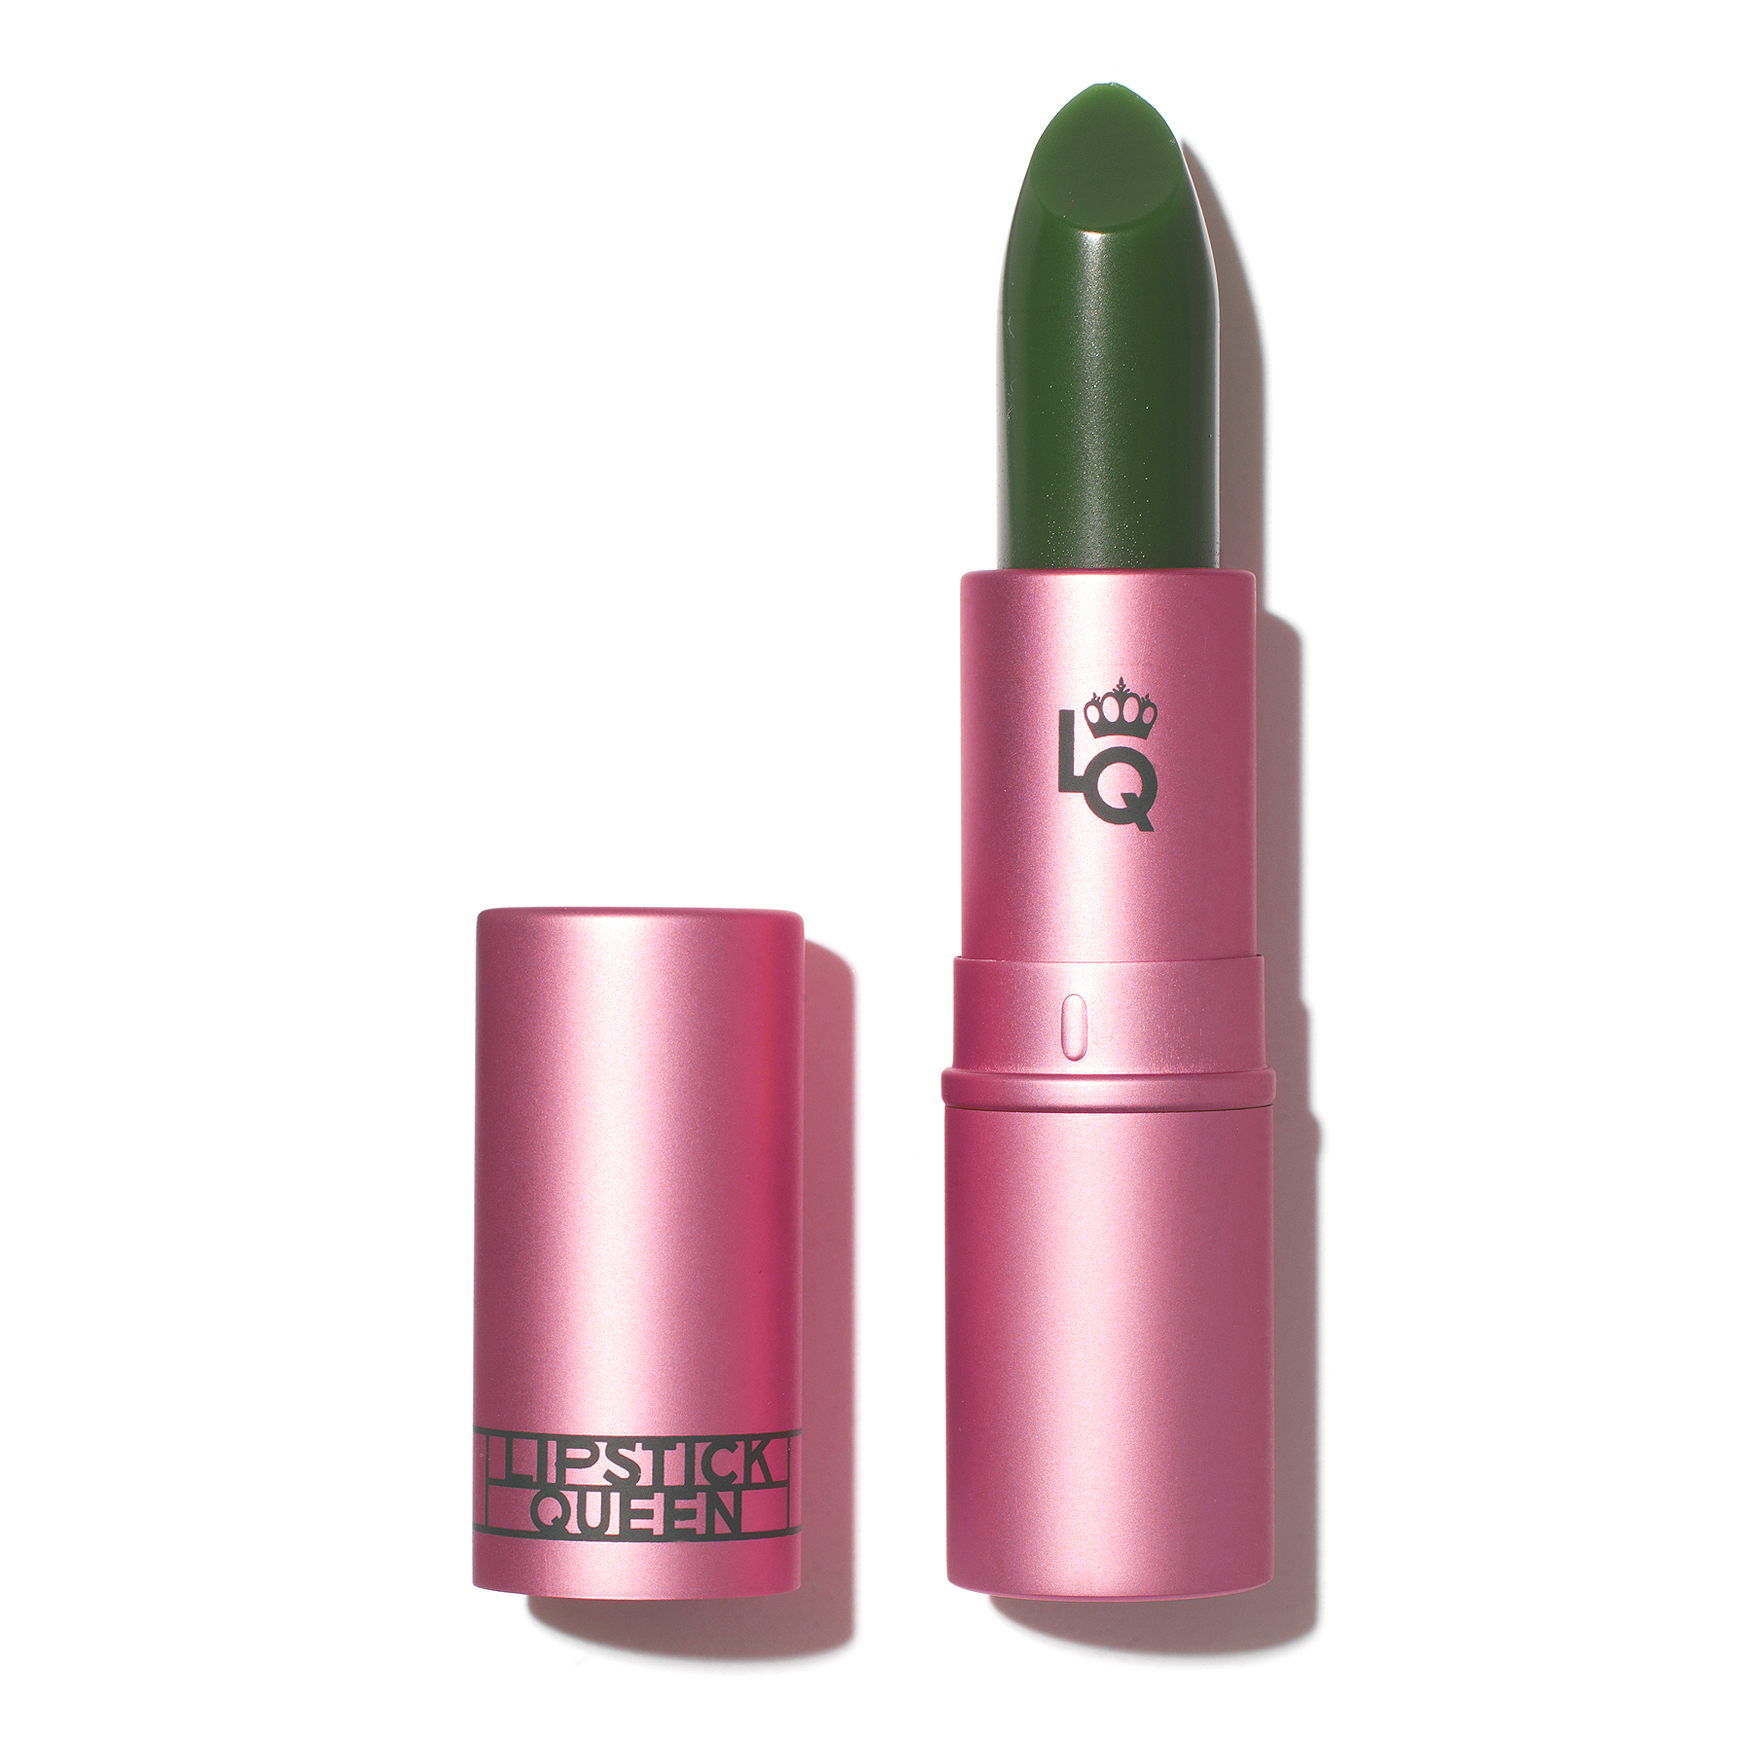 Lipstick Queen Frog Prince Lipstick | Space NK